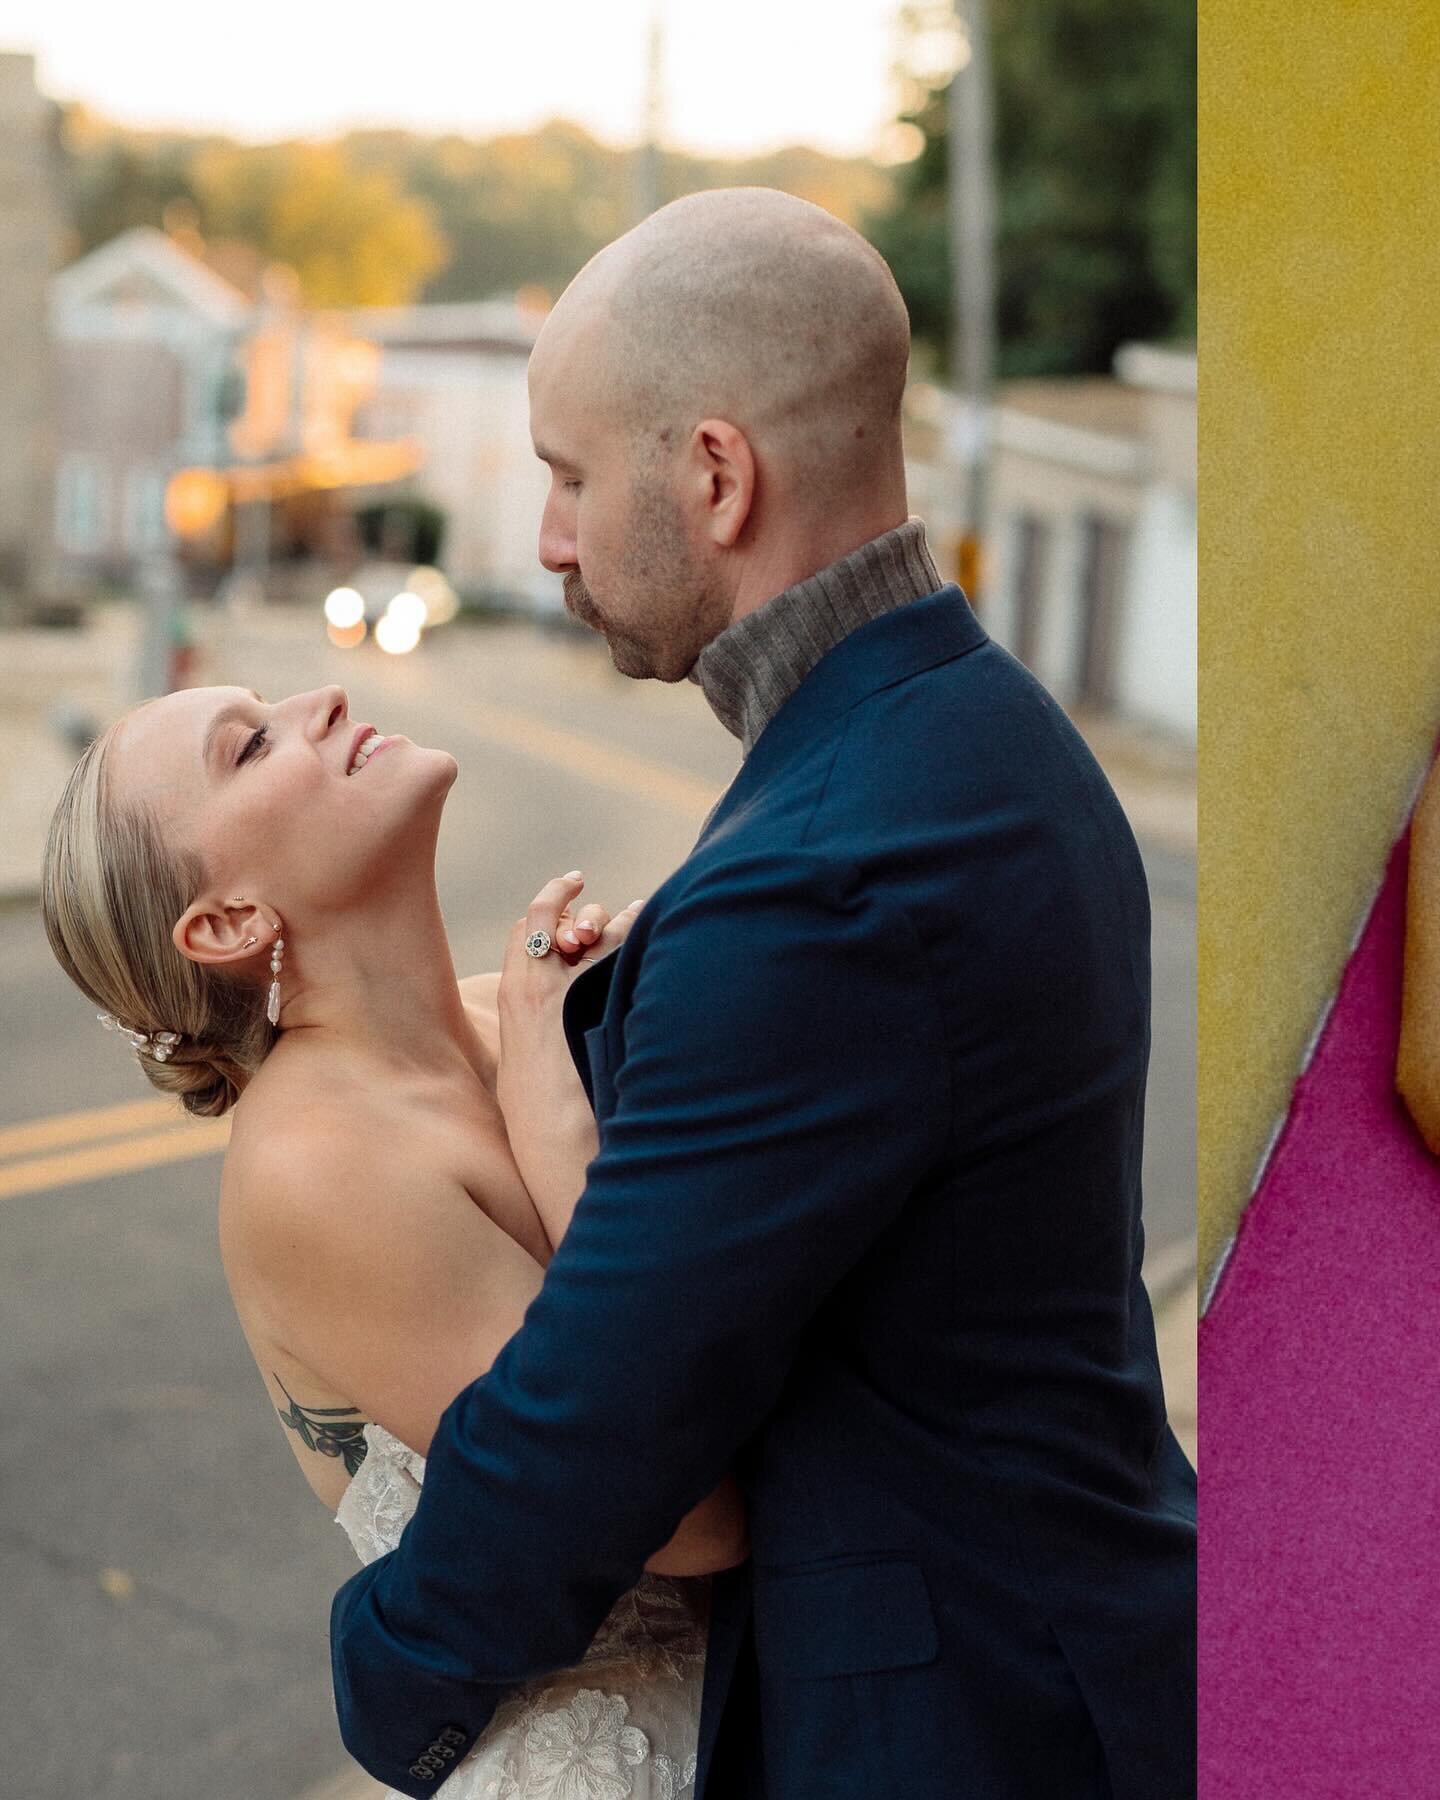 I had a unique opportunity this last October to photograph a very intimate ceremony in Manayunk. Elke and Wesley said their (very heartfelt) vows at home, surrounded by their closest family and friends. It was one of those ceremonies that I wanted to